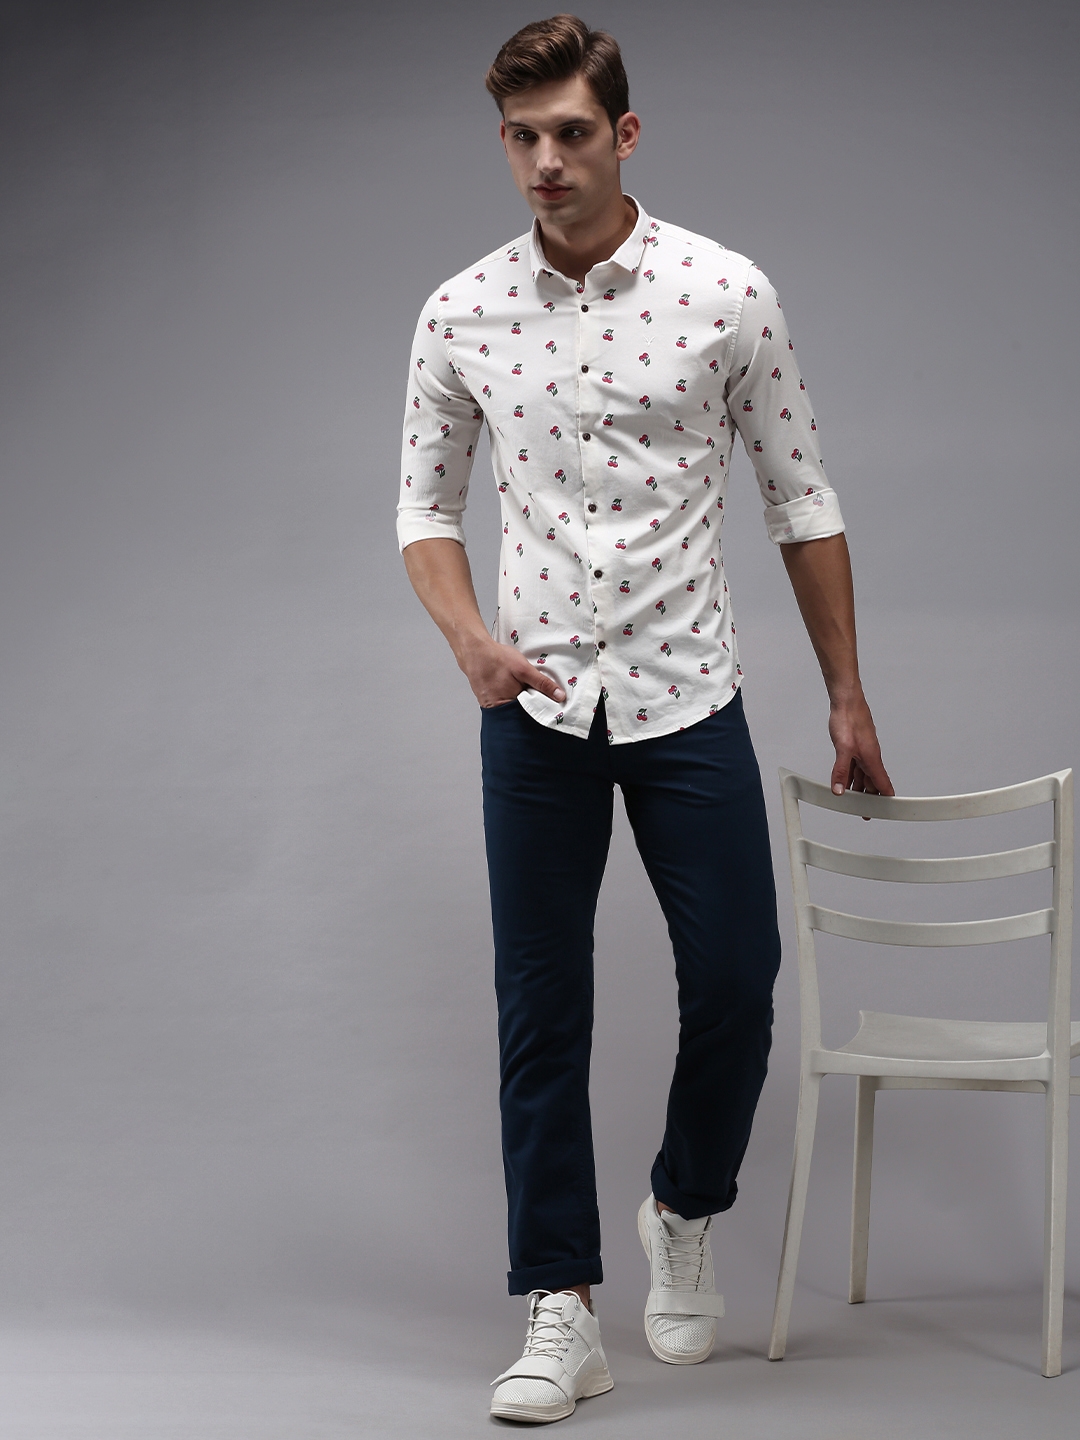 Men's Beige Cotton Printed Casual Shirts